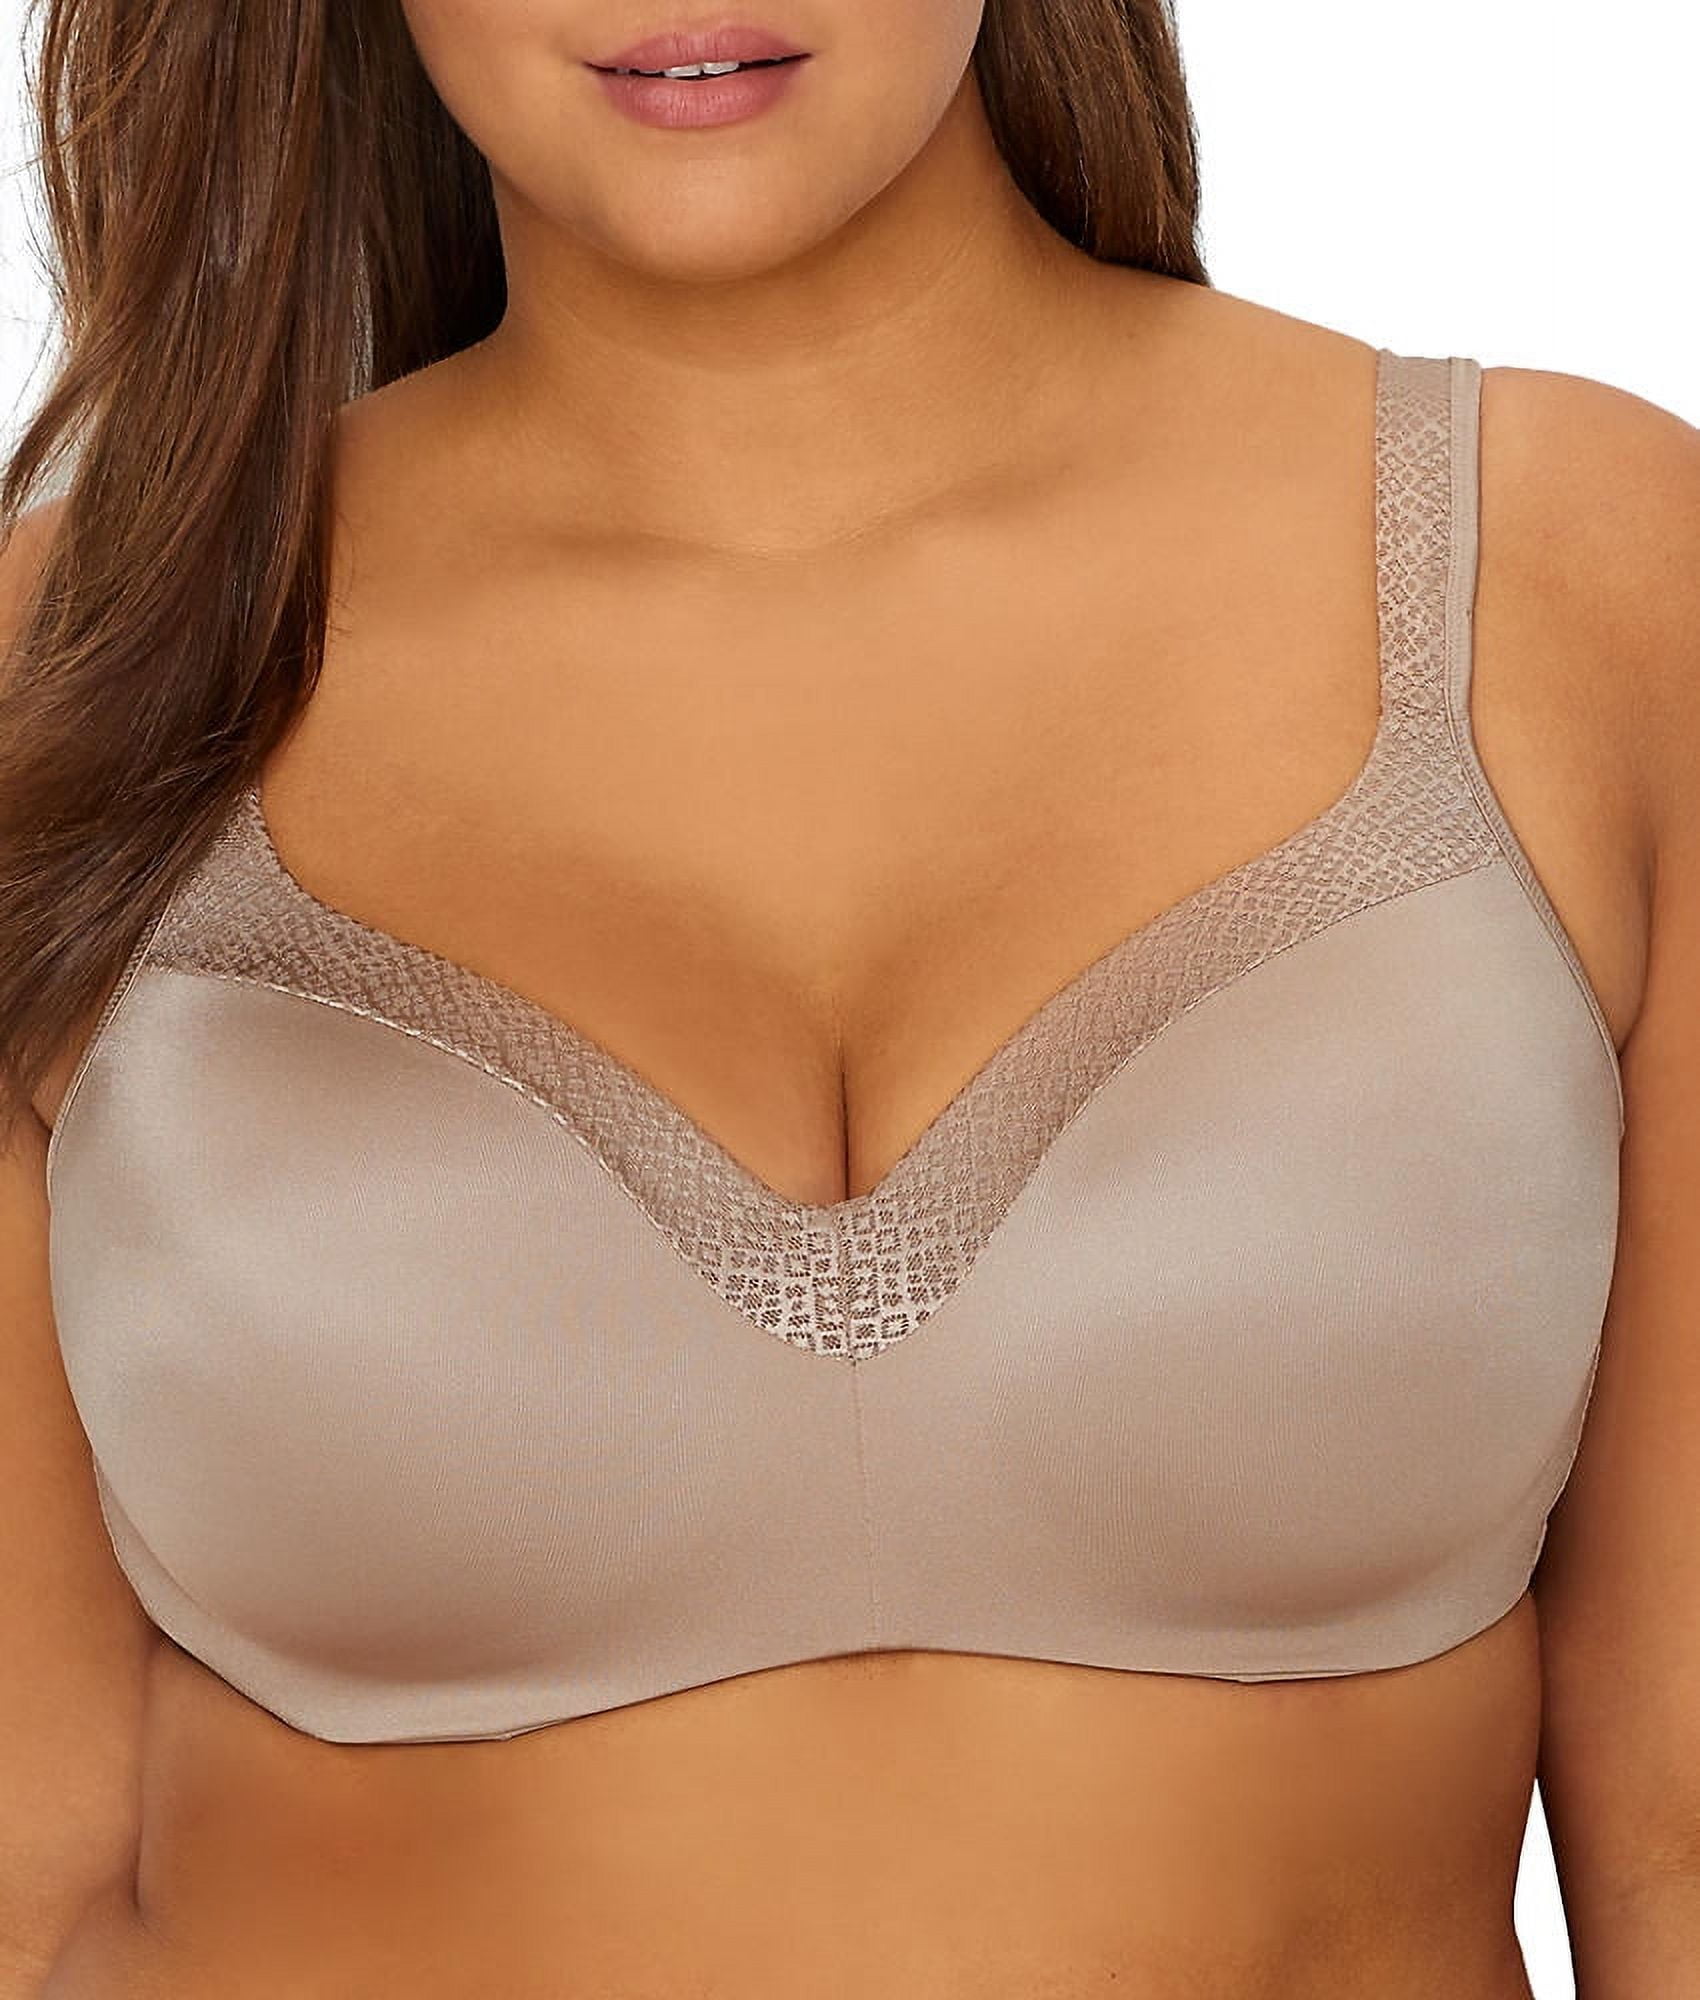 PLAYTEX Love My Curves Lift Bras (2) - Style 4514 - 42D - NWT Free Shipping